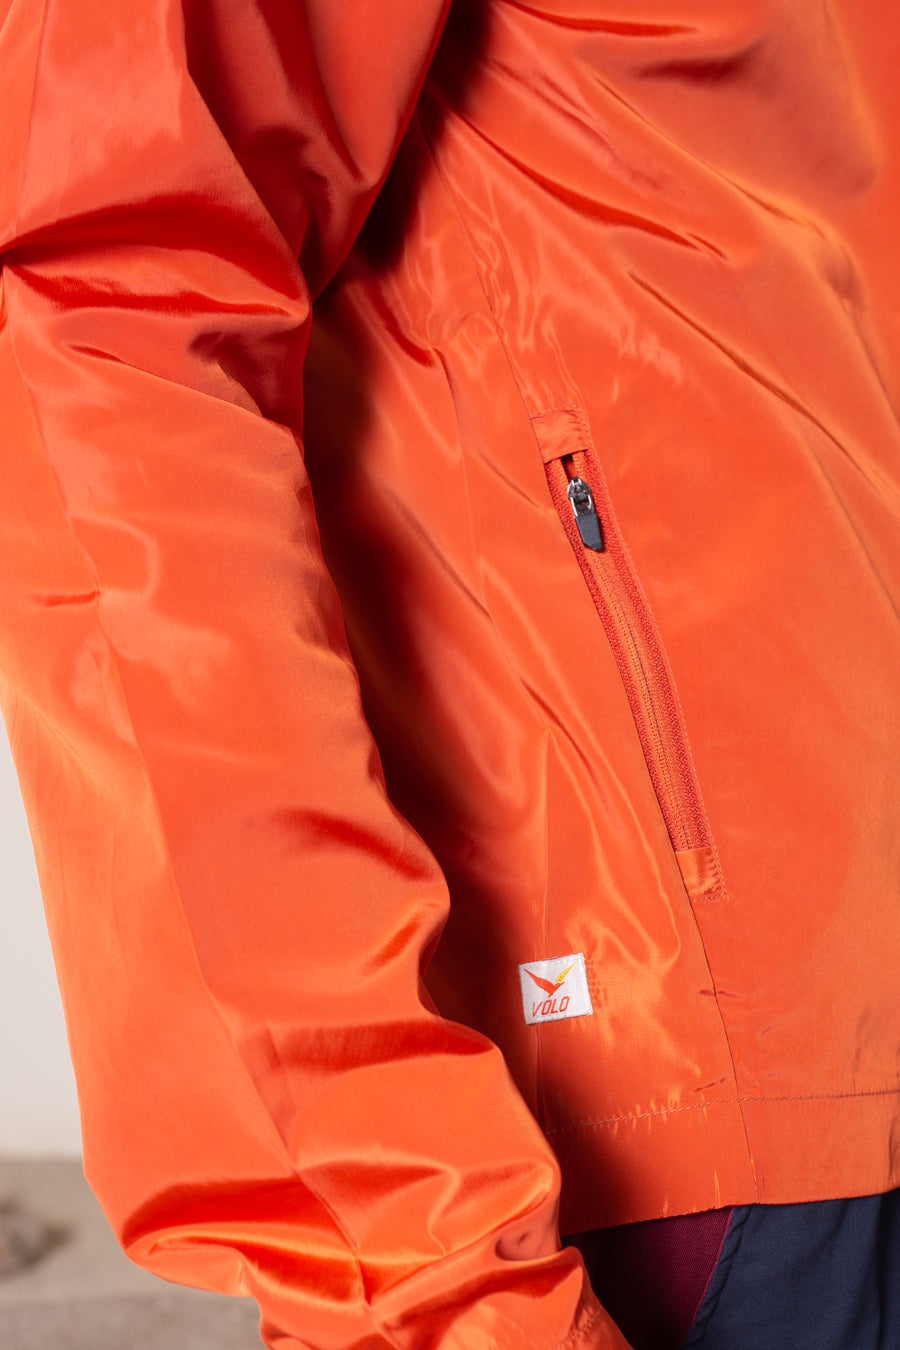 Men's Windansea Jacket in Orange | VOLO Apparel | The ultimate all year jacket, an ultralight hooded windbreaker, crafted with the revolutionary memory fabric and five pockets. This jacket is full of features, water repellant, three zipper pockets, UPF 50 protection from the sun and tailored fit to look super stylish while being ready for any adventure.